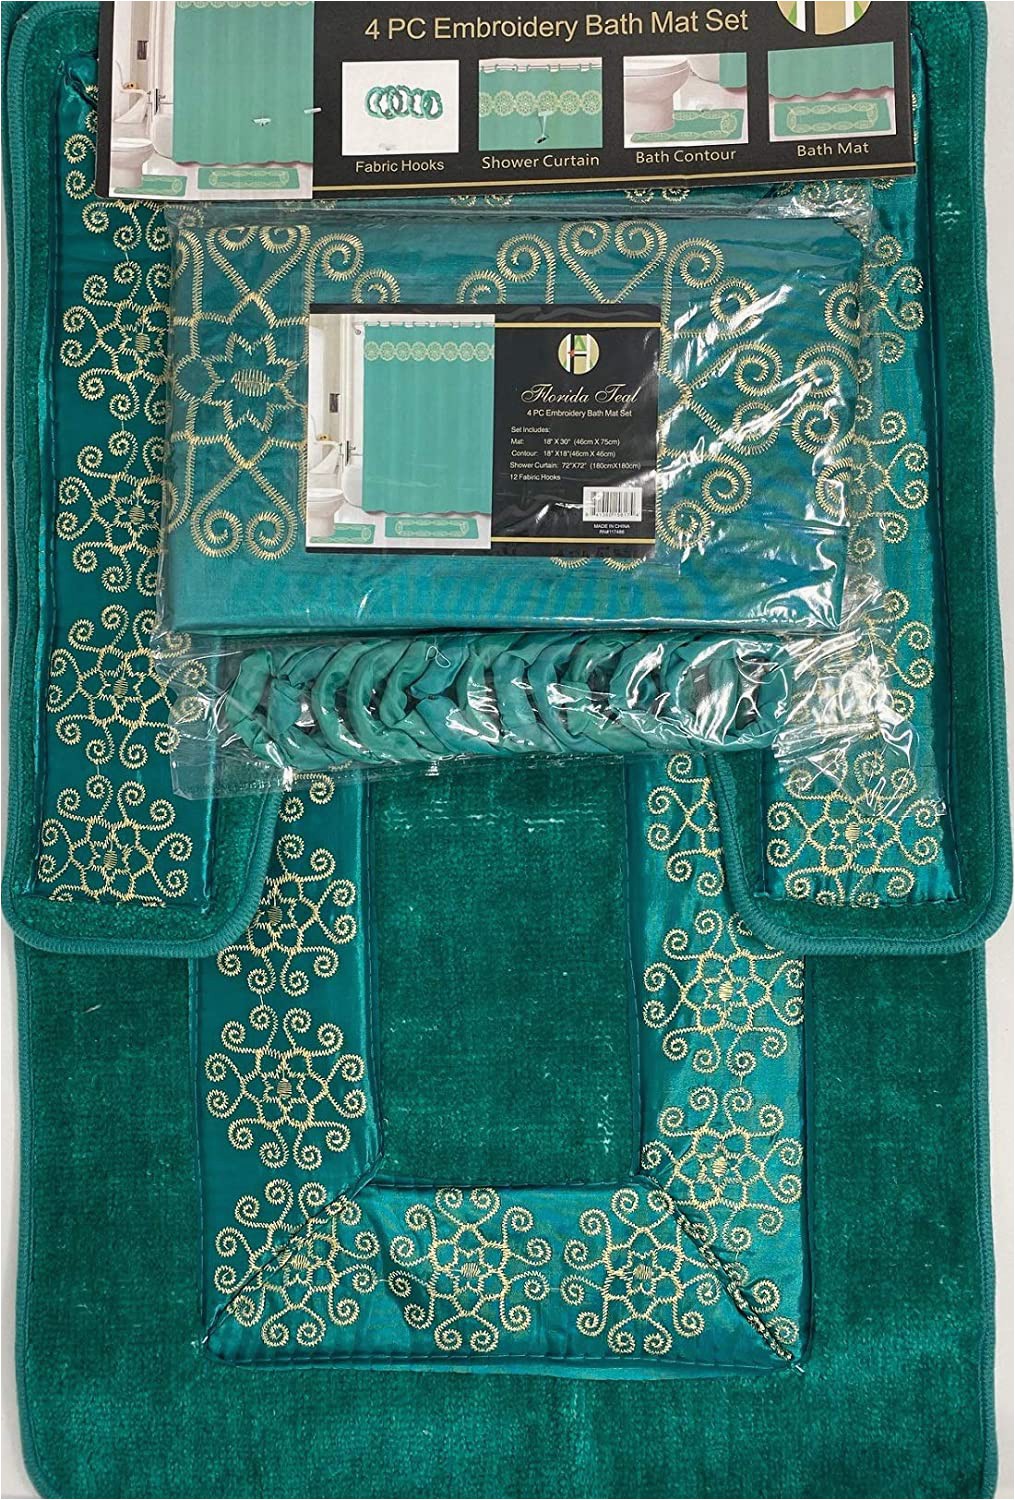 Gold Color Bathroom Rugs 4 Piece Bathroom Rugs Set Non Slip Teal Gold Bath Rug toilet Contour Mat with Fabric Shower Curtain and Matching Rings Florida Teal